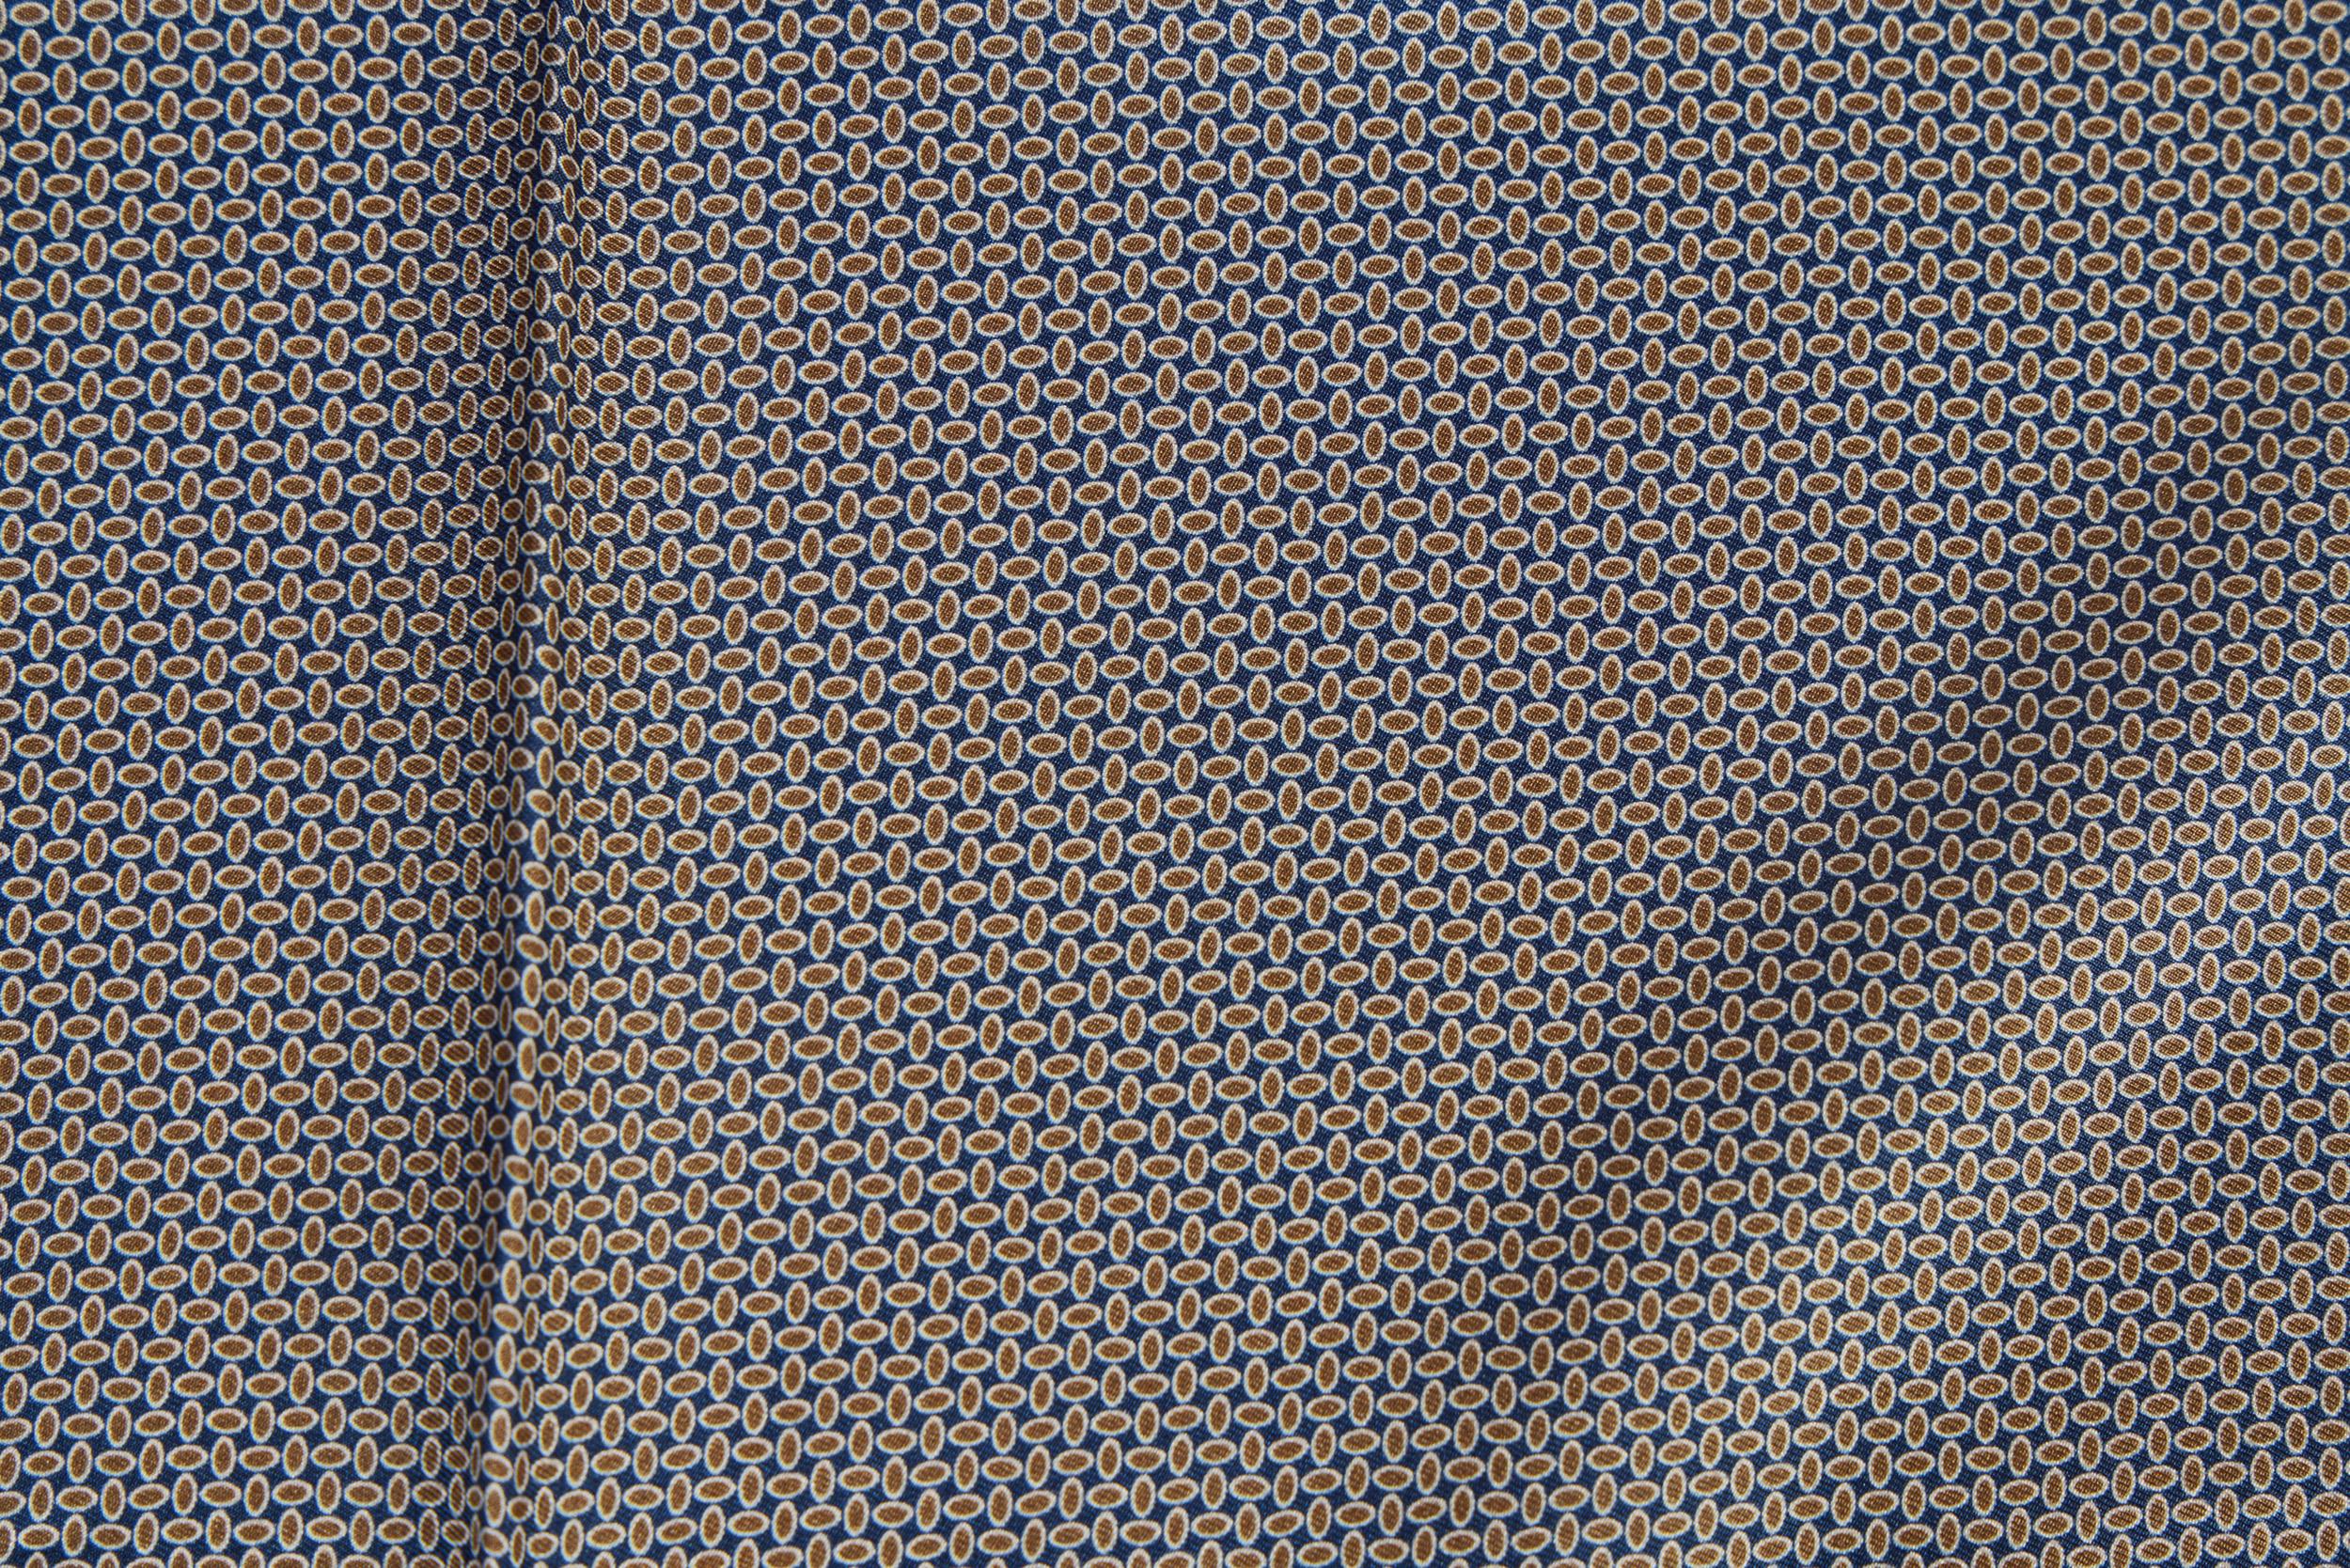 Louis Vuitton brand new silk pocket square in geometric blue and gold pattern . Hand rolled edges.